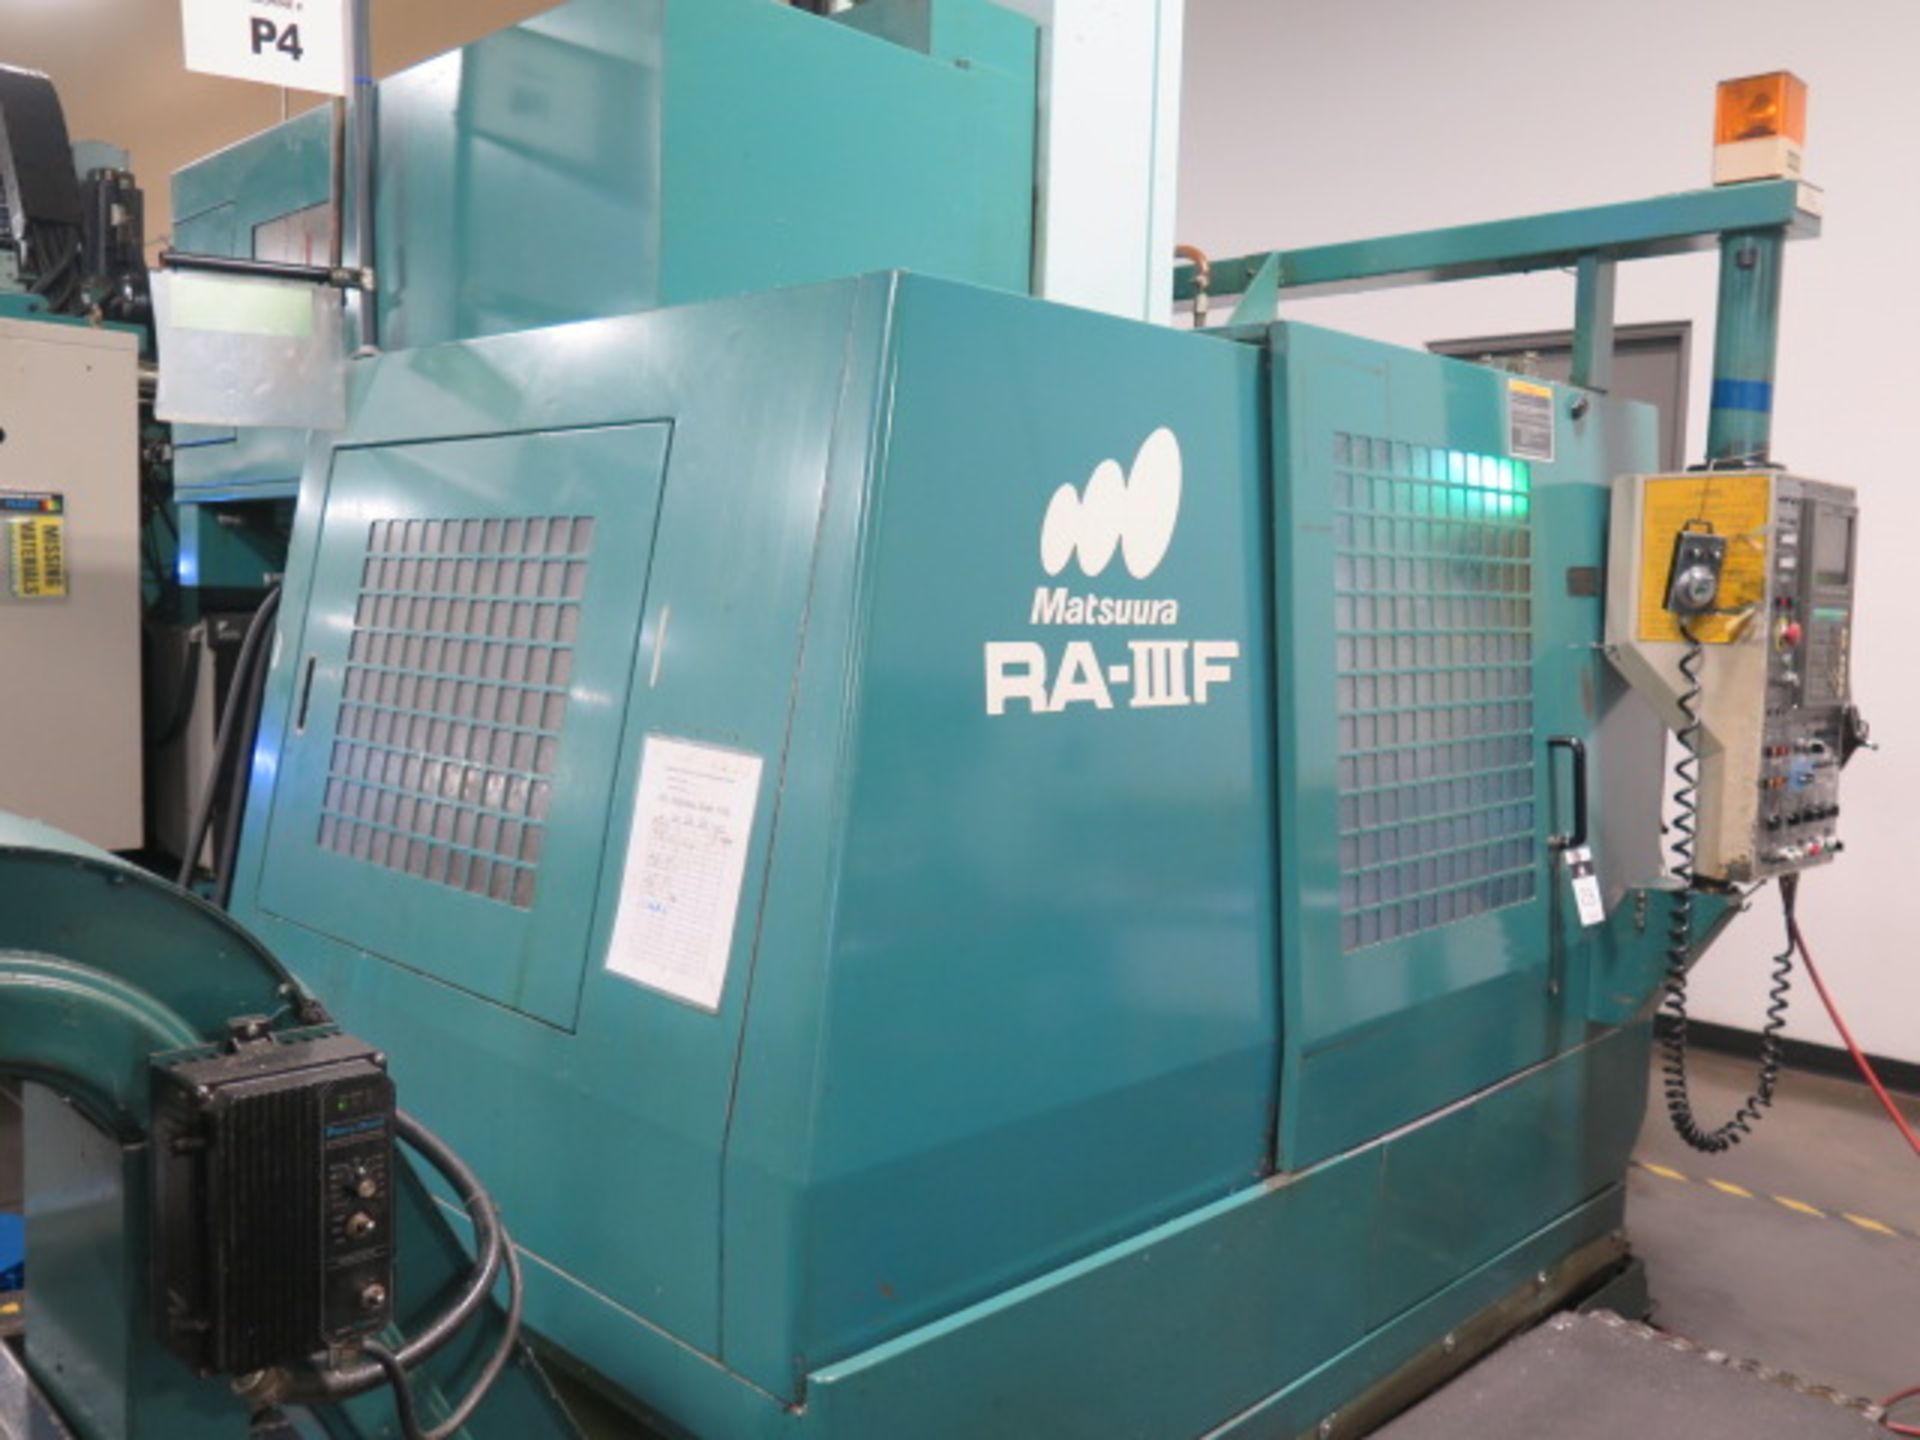 Matsuura RA-3F 2-Pallet CNC Vertical Machining Center s/n 950711554 w/ Yasnac i-80 Controls, Hand Wh - Image 3 of 22